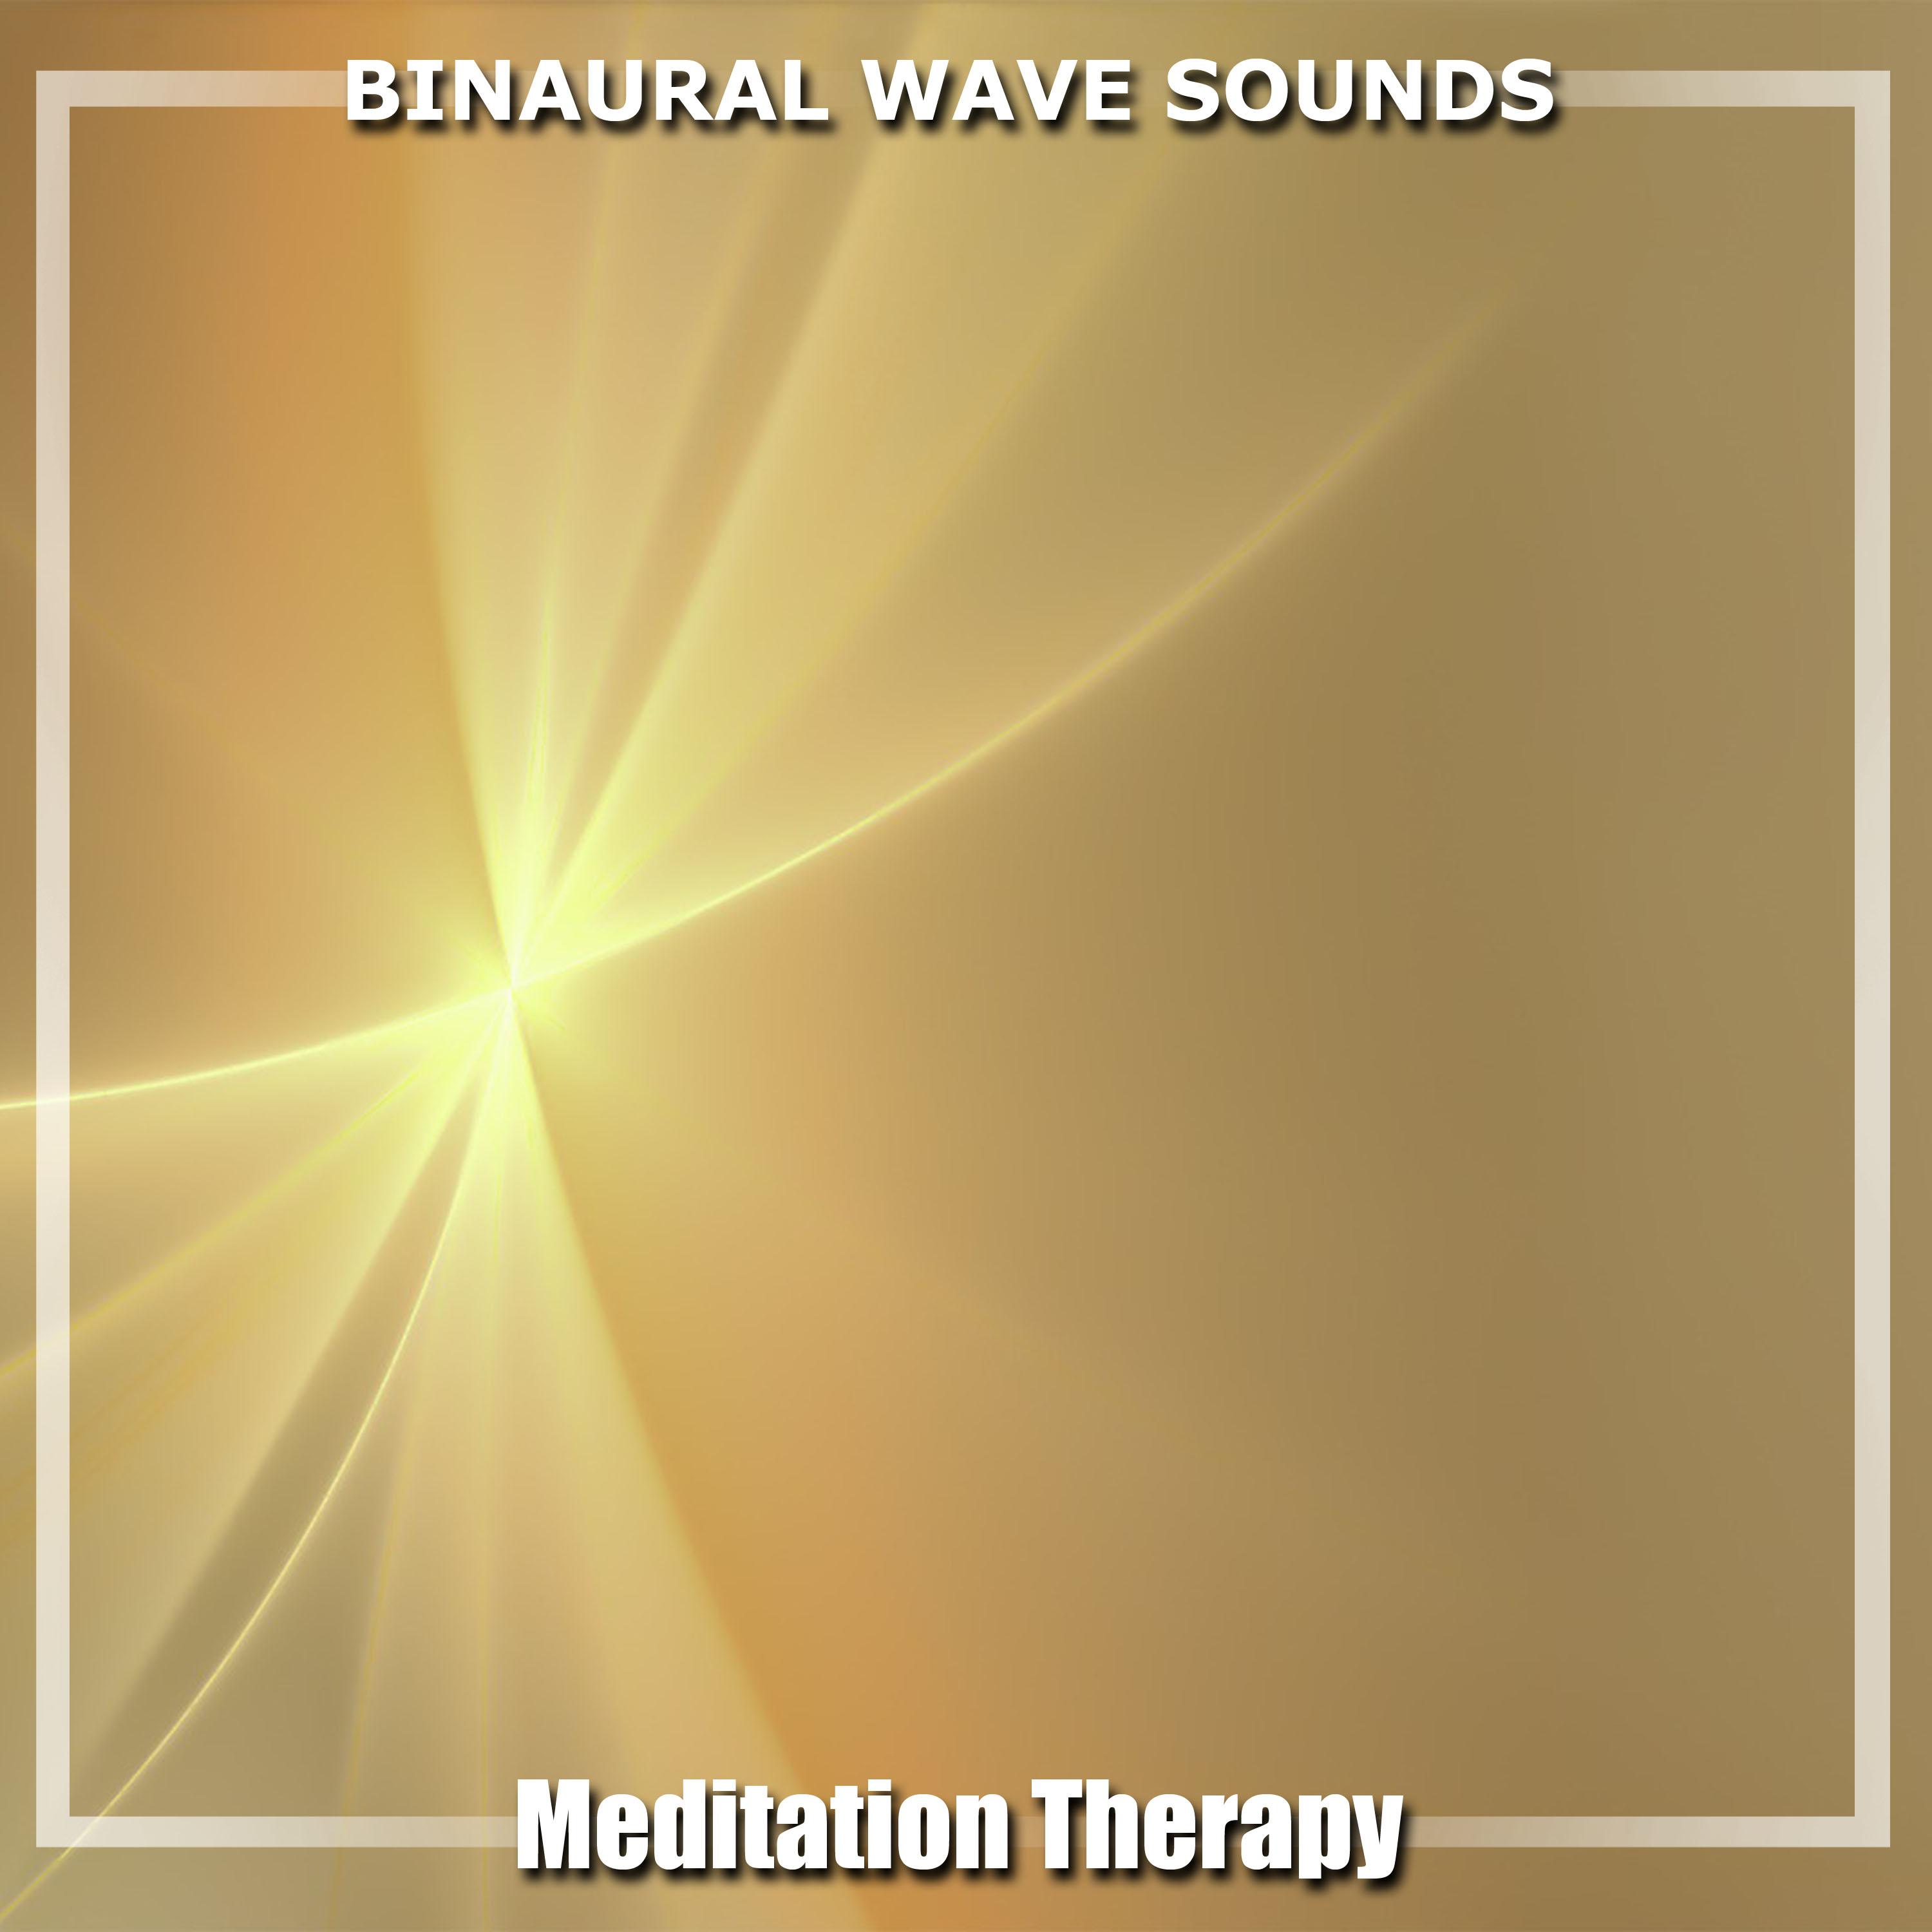 14 Binaural Wave Sounds for Meditative Therapy